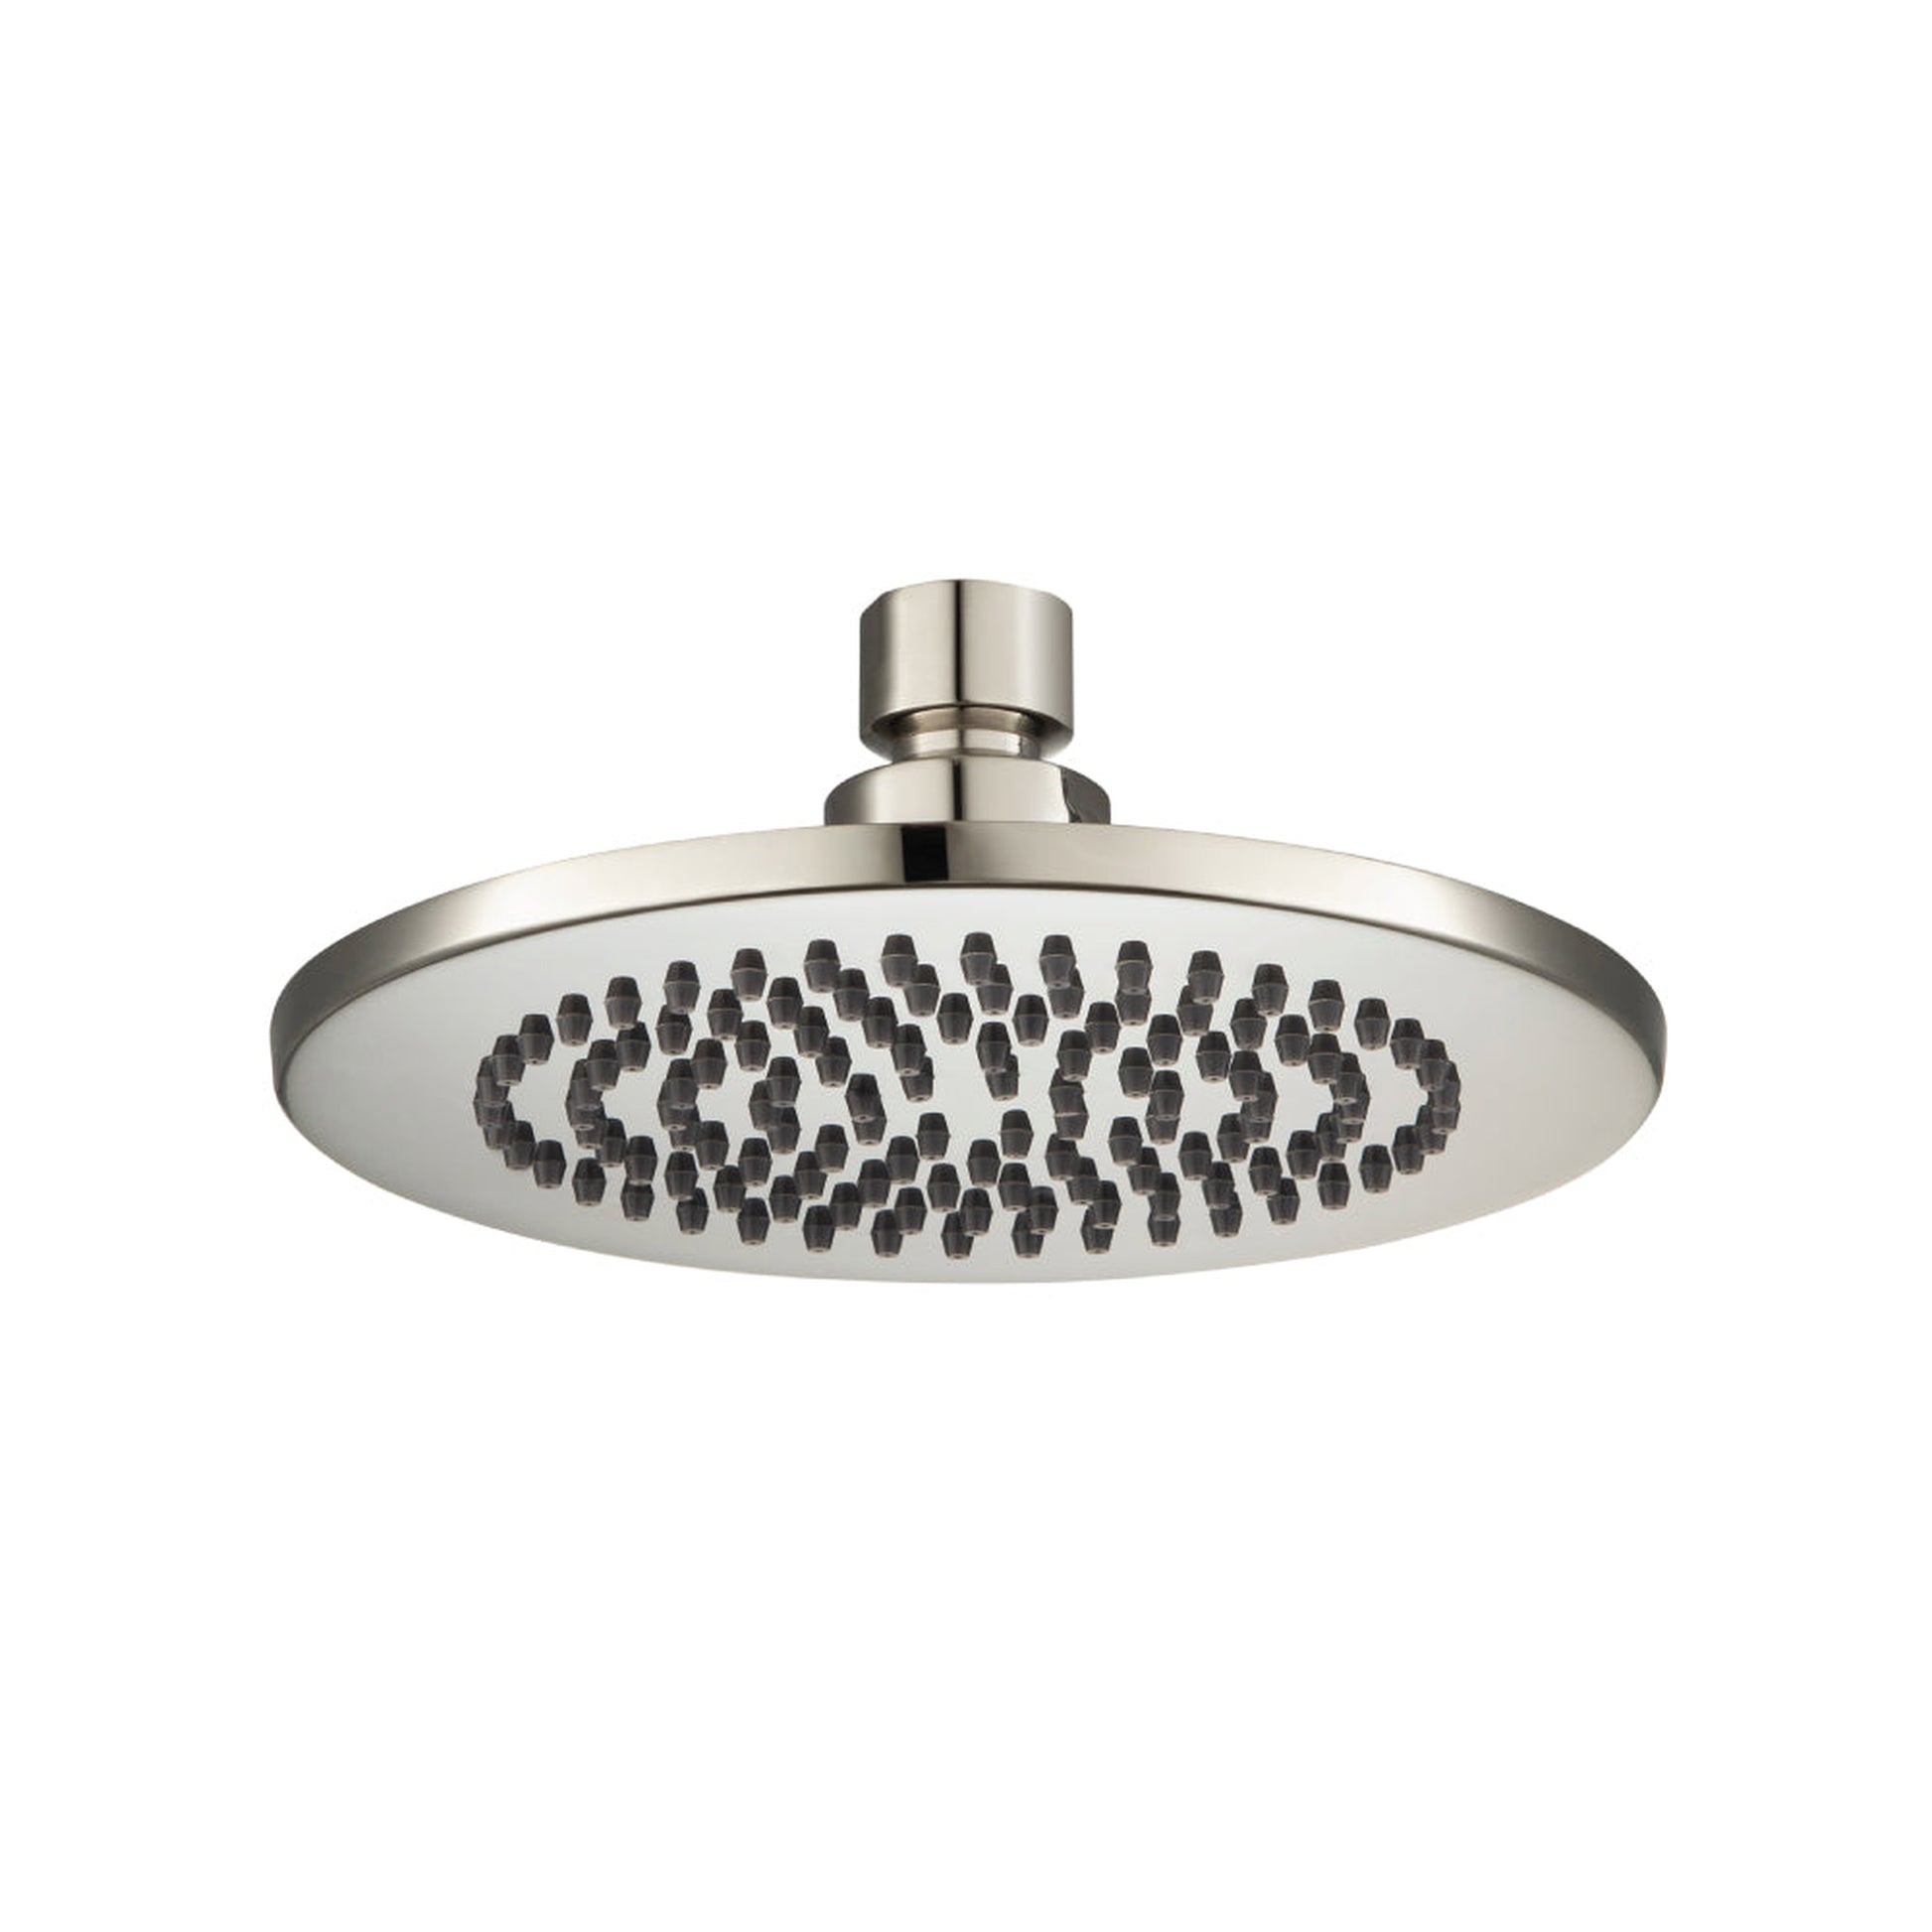 Isenberg Universal Fixtures 6" Single Function Round Polished Nickel PVD Solid Brass Rain Shower Head With 7" Wall Mounted Shower Arm